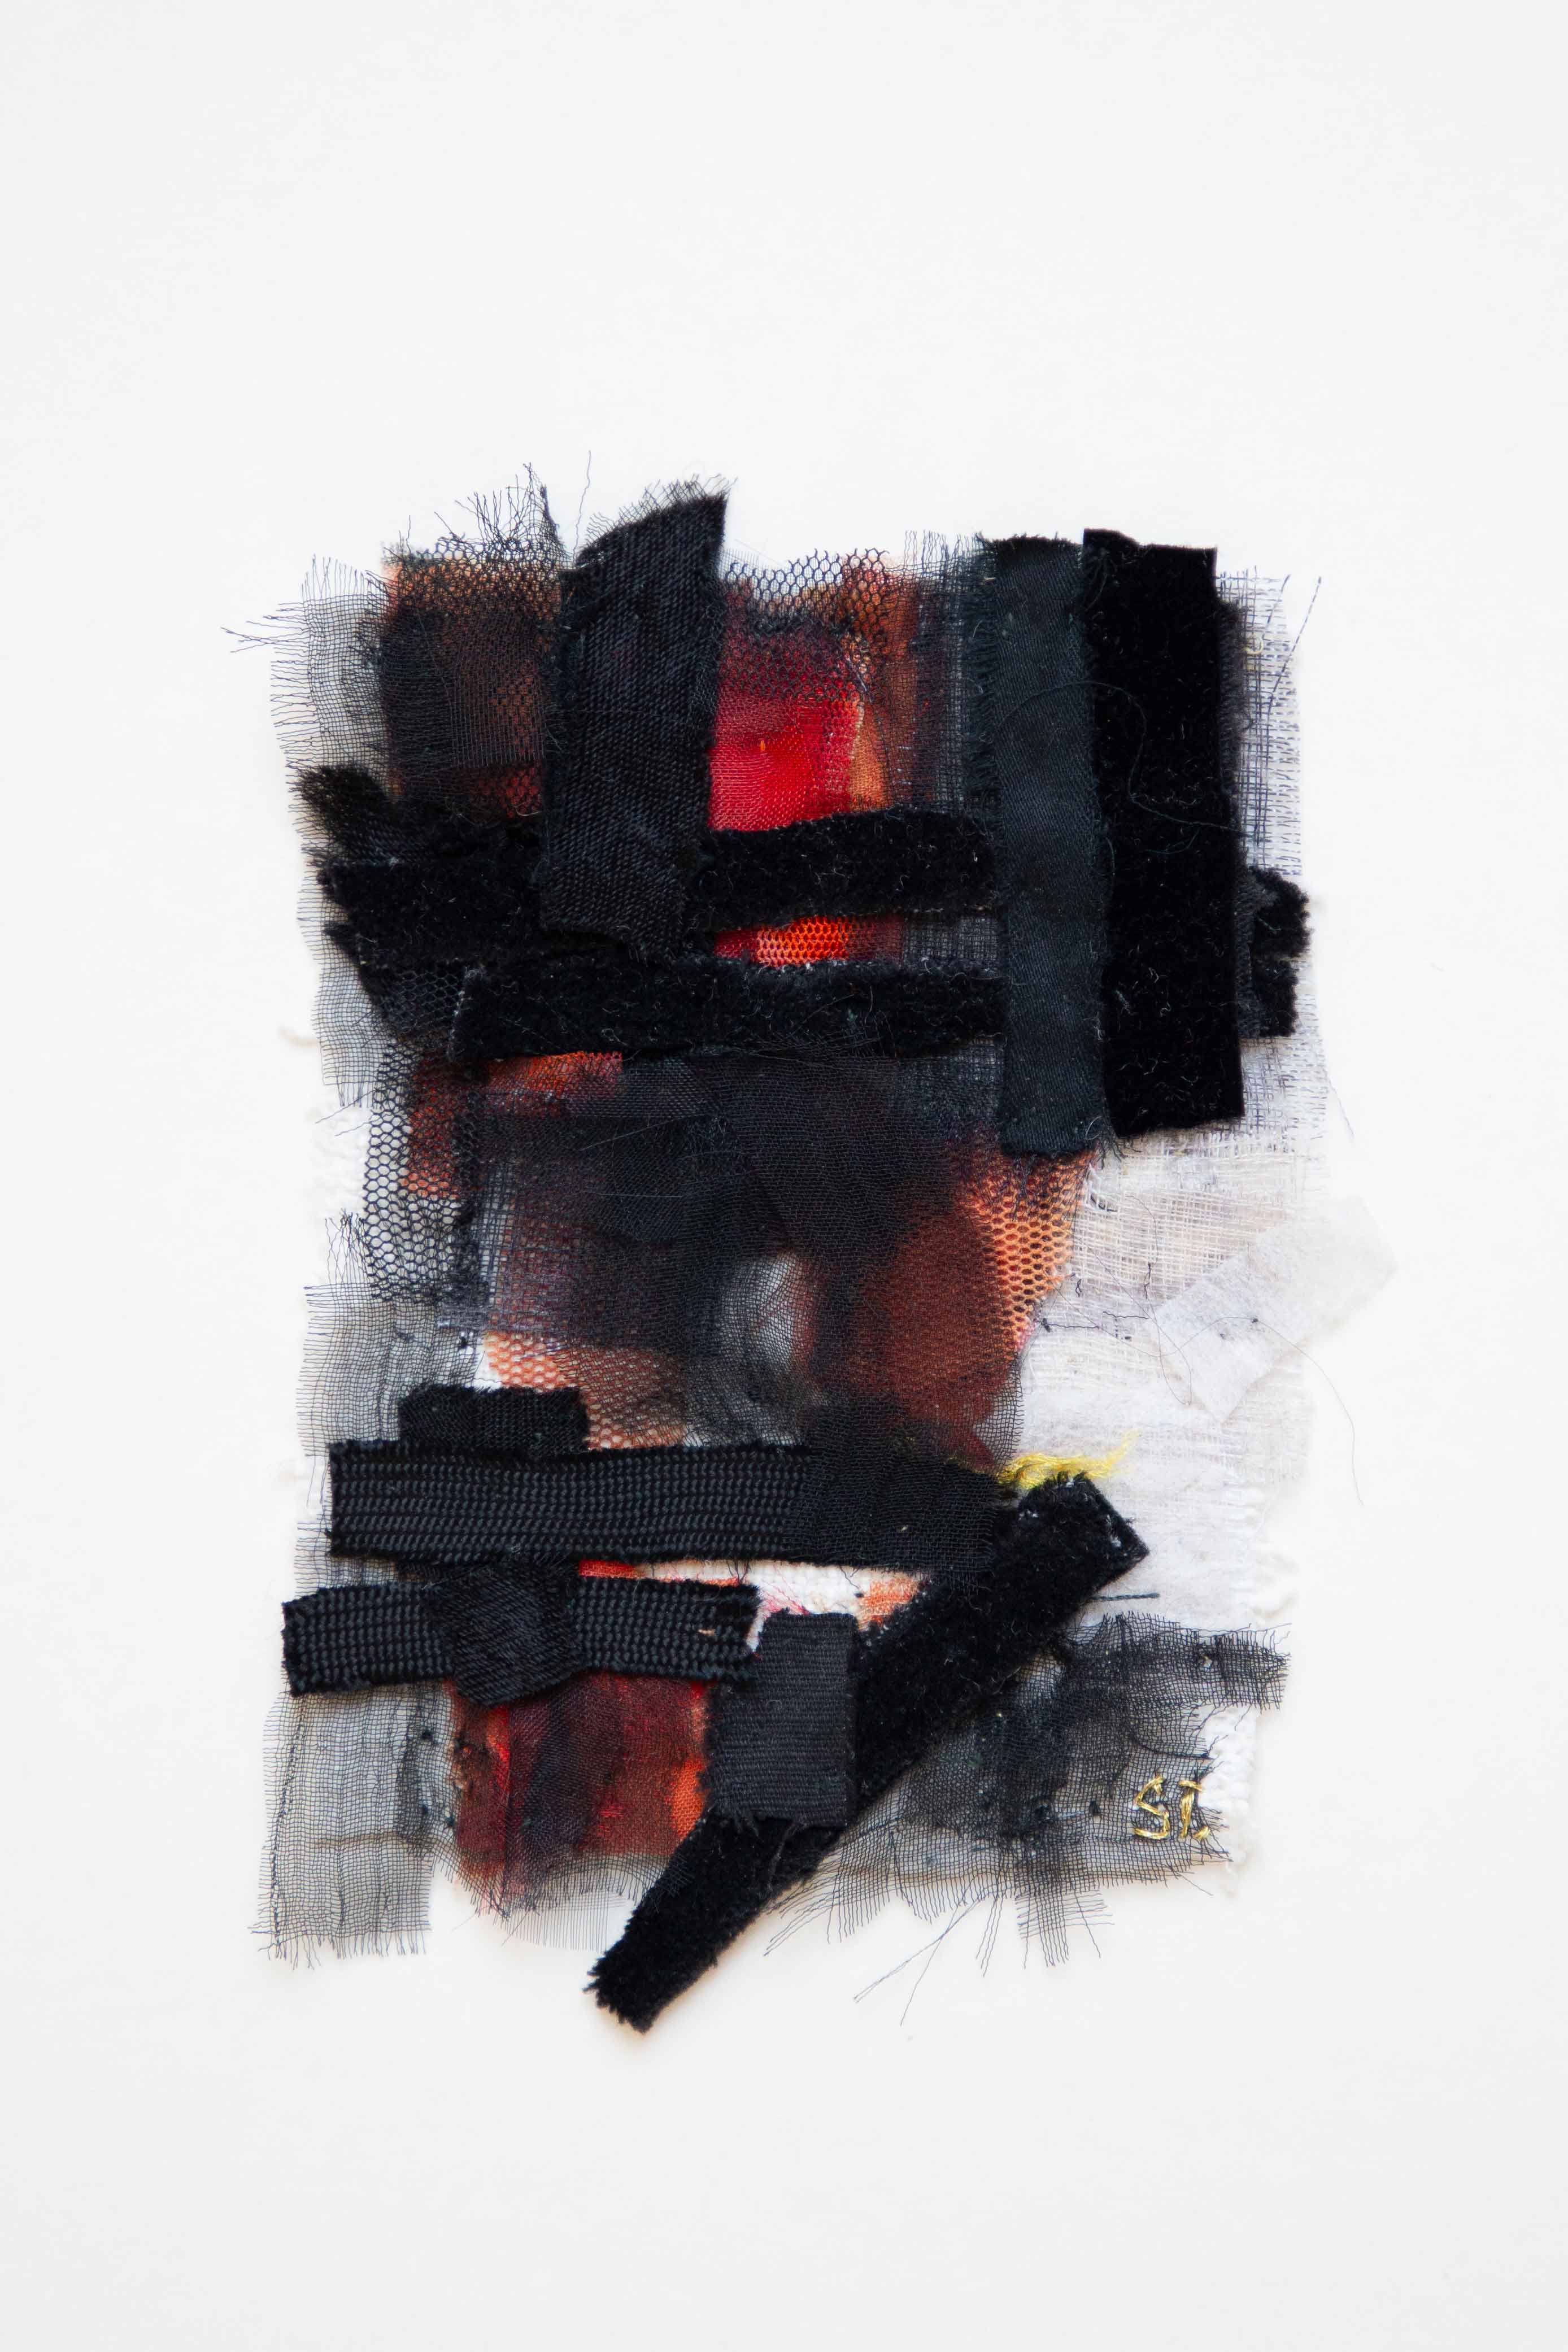 Tribute to Soulages - Mes soulagements 1